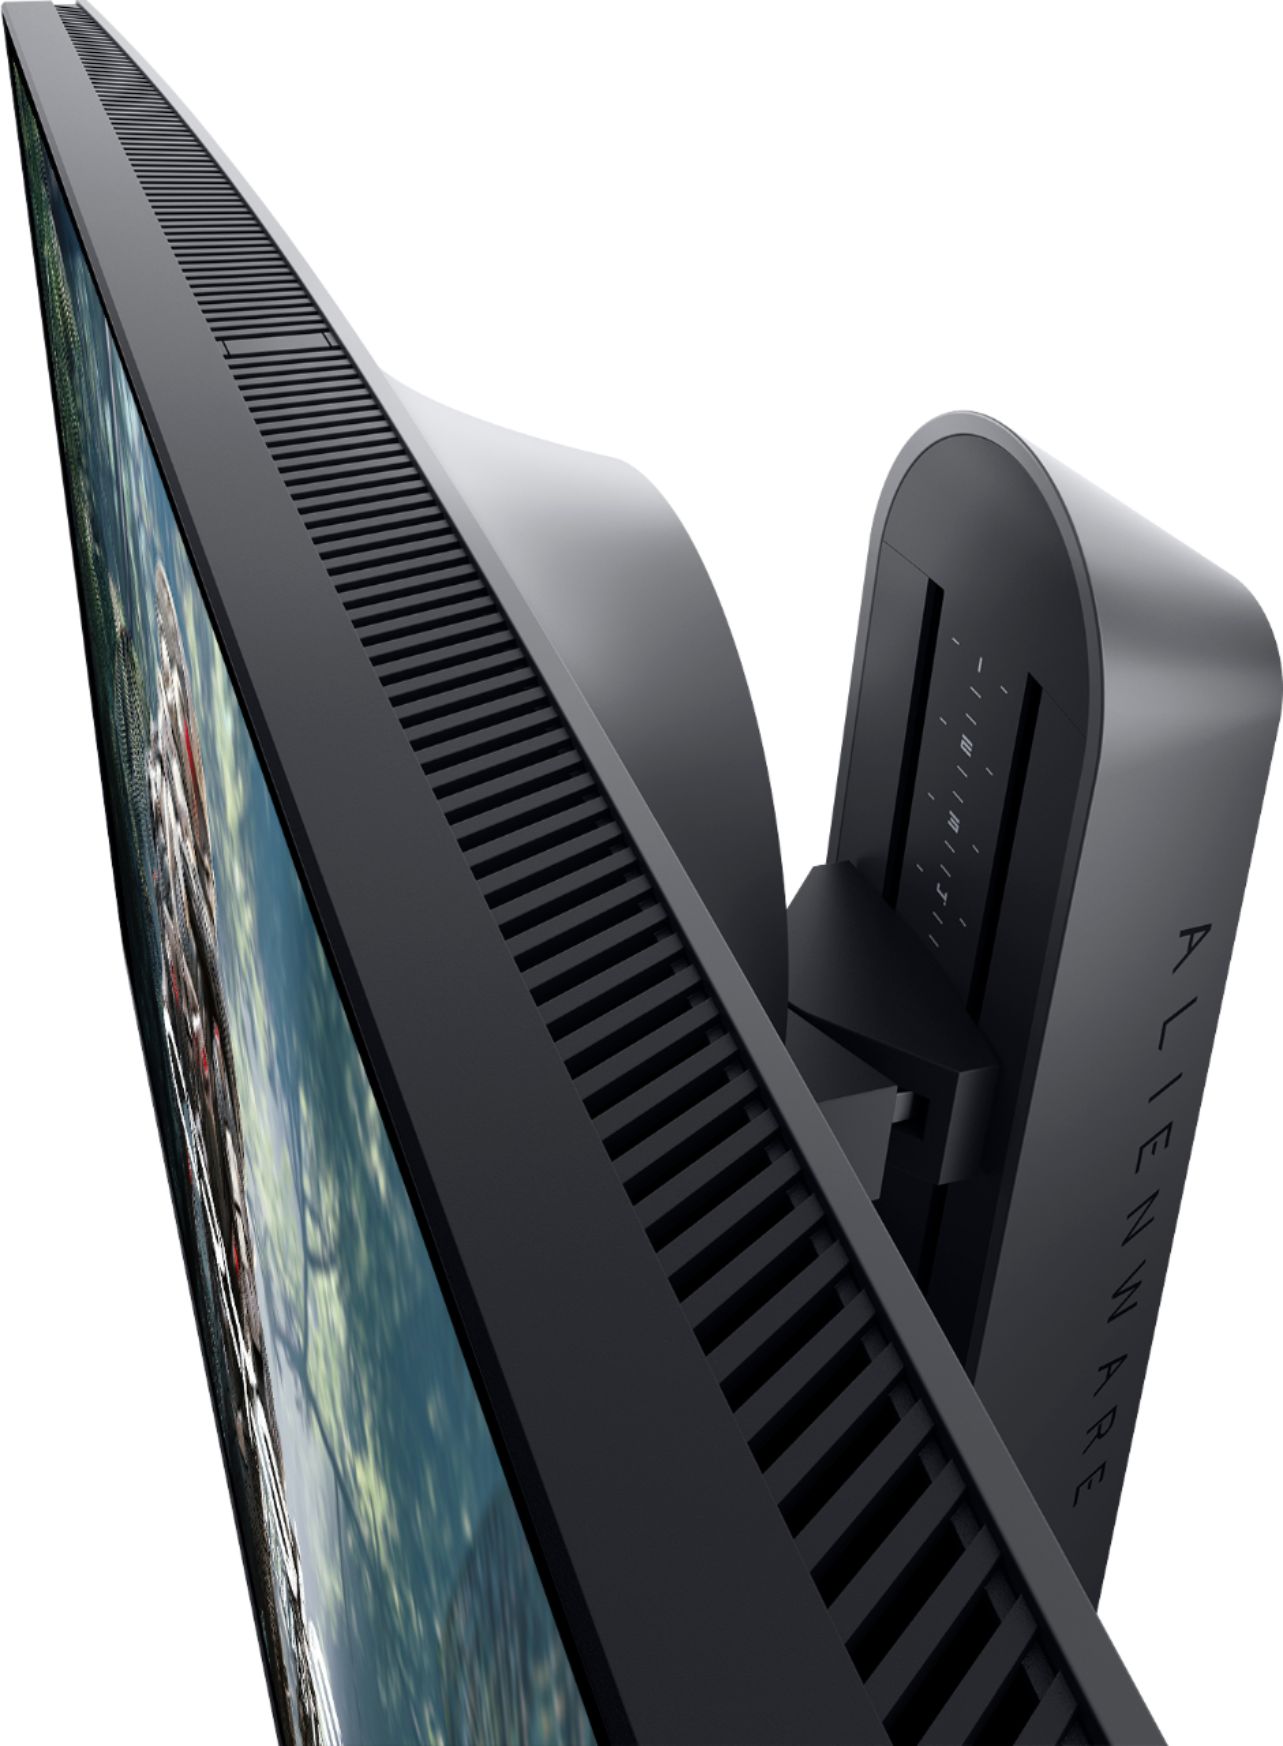 PC/タブレット デスクトップ型PC Best Buy: Alienware AW2521H 25